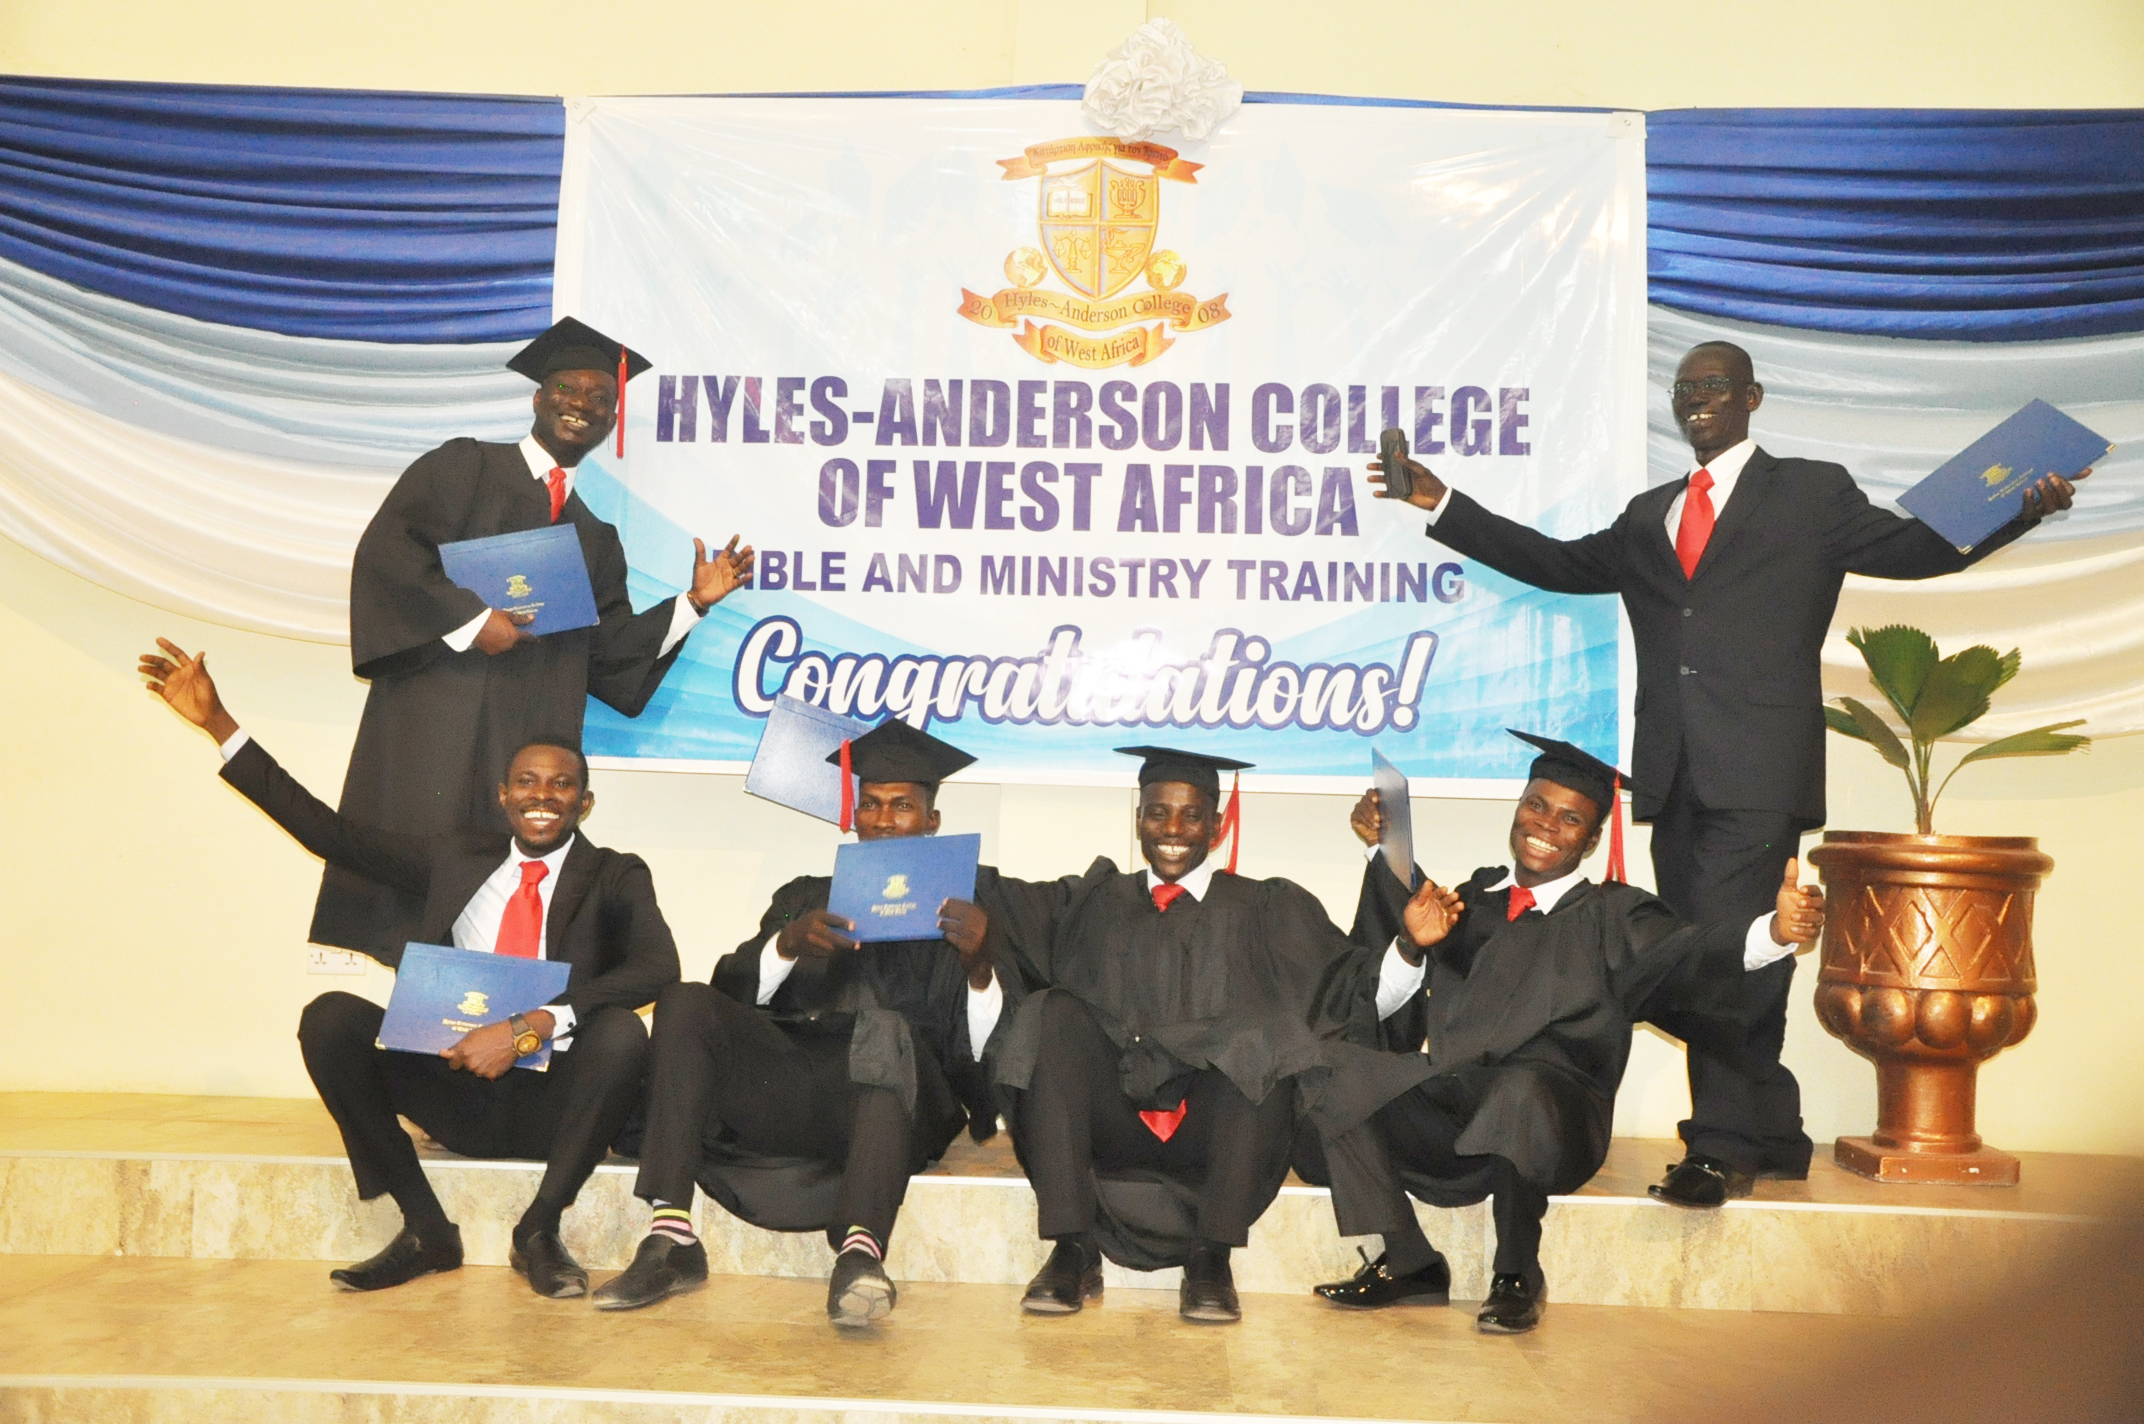 February 2018 Graduations of Hyles-Anderson College of West Africa